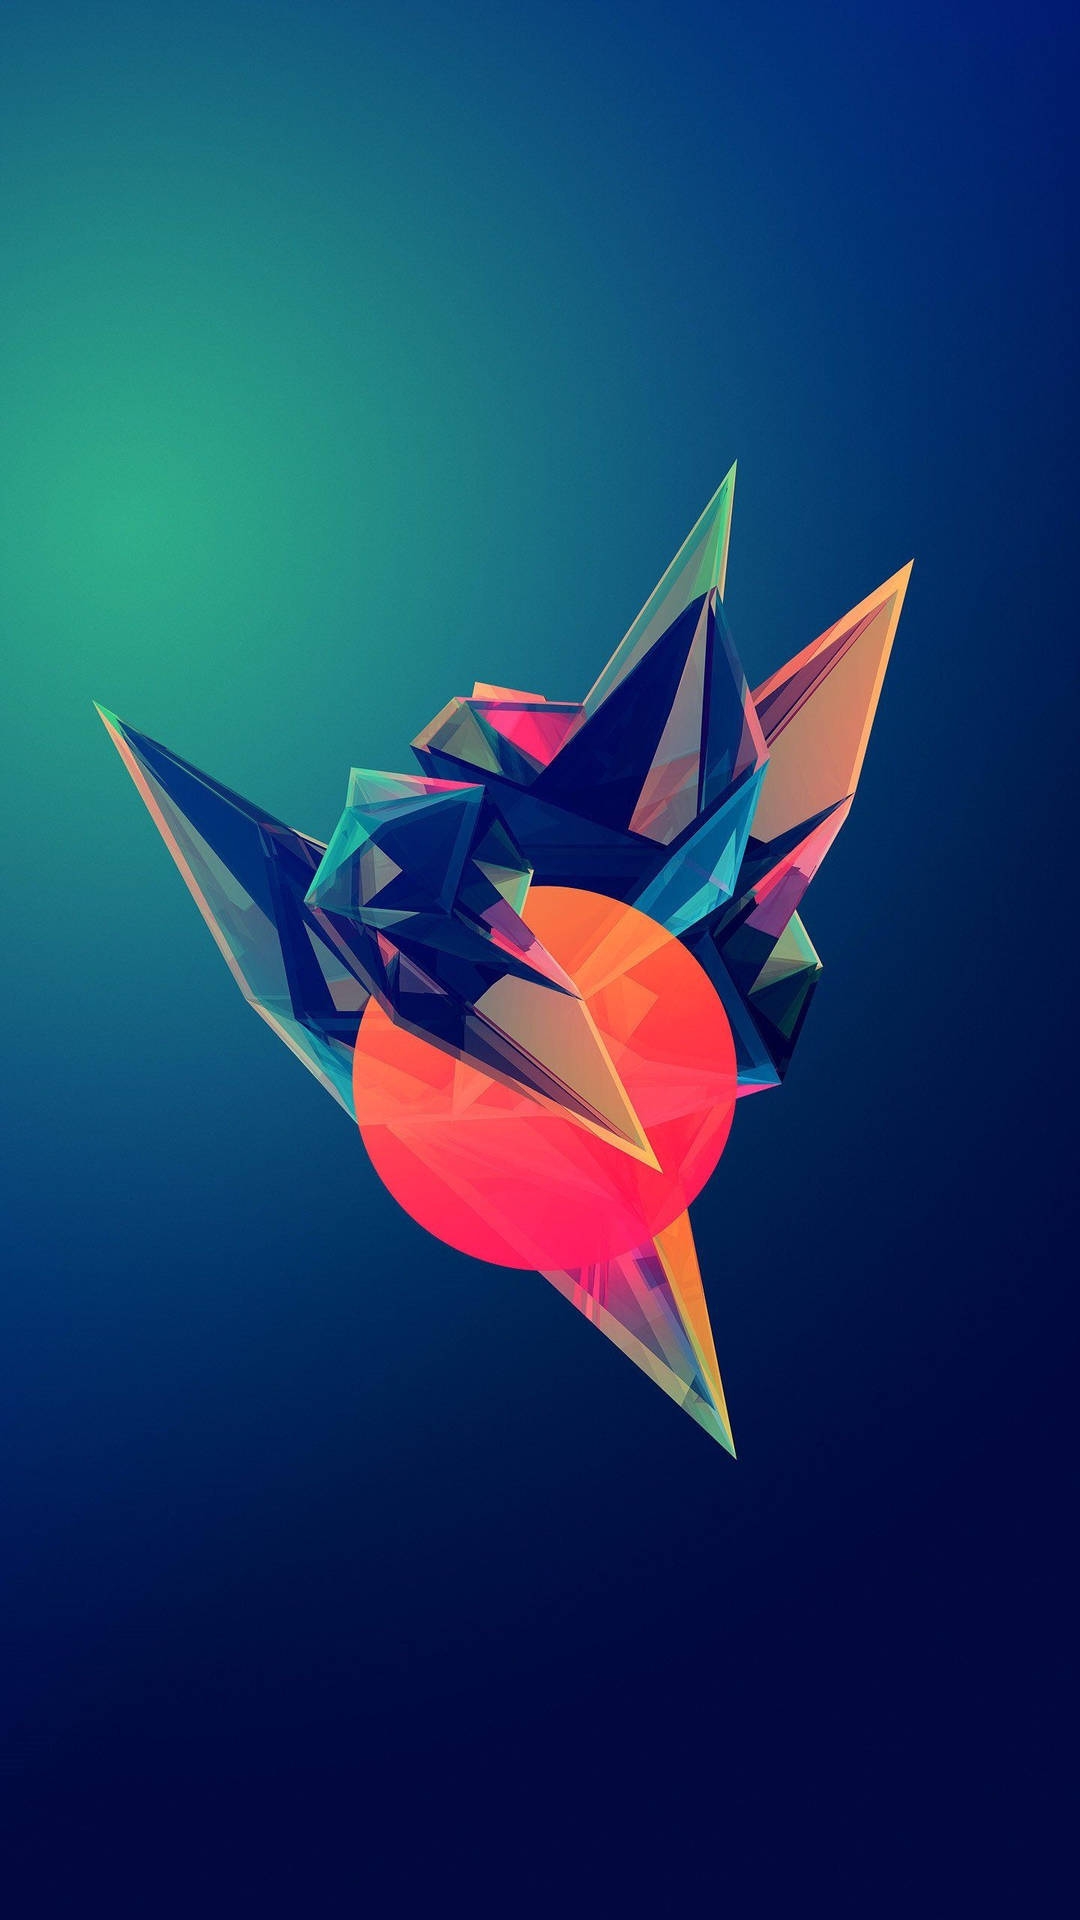 Sharp Low Poly Origami